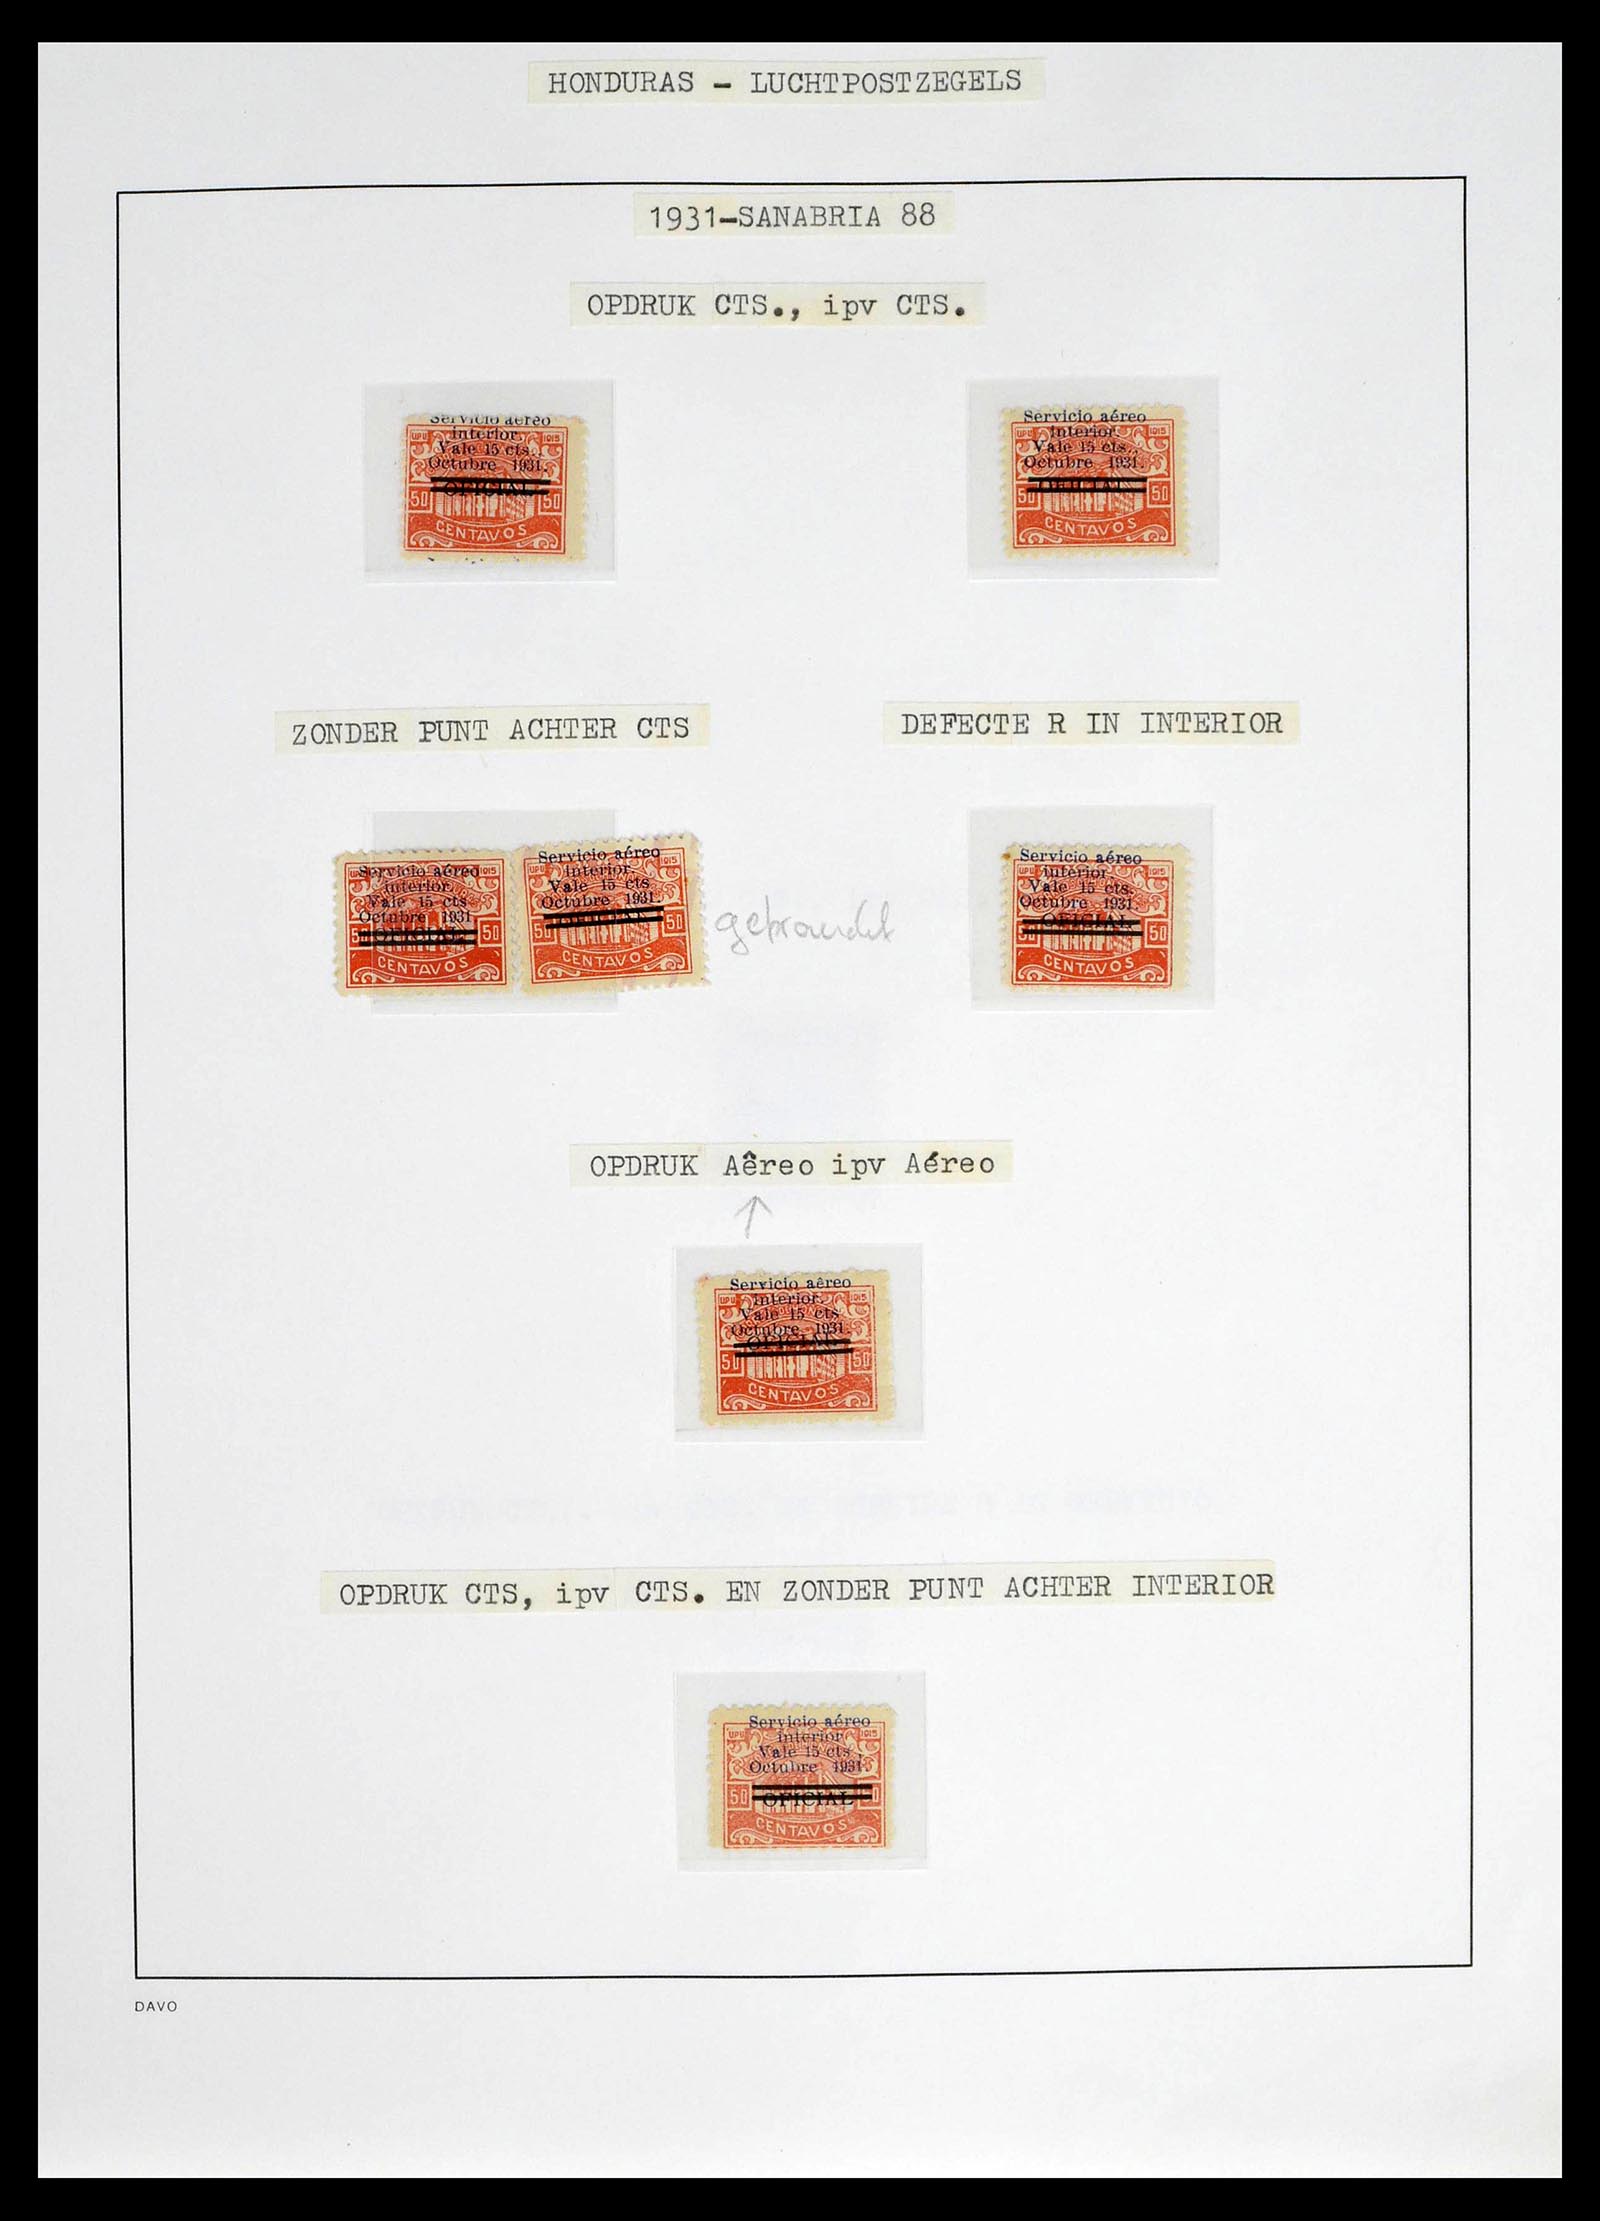 39410 0032 - Stamp collection 39410 Honduras topcollection airmail 1925-1984.